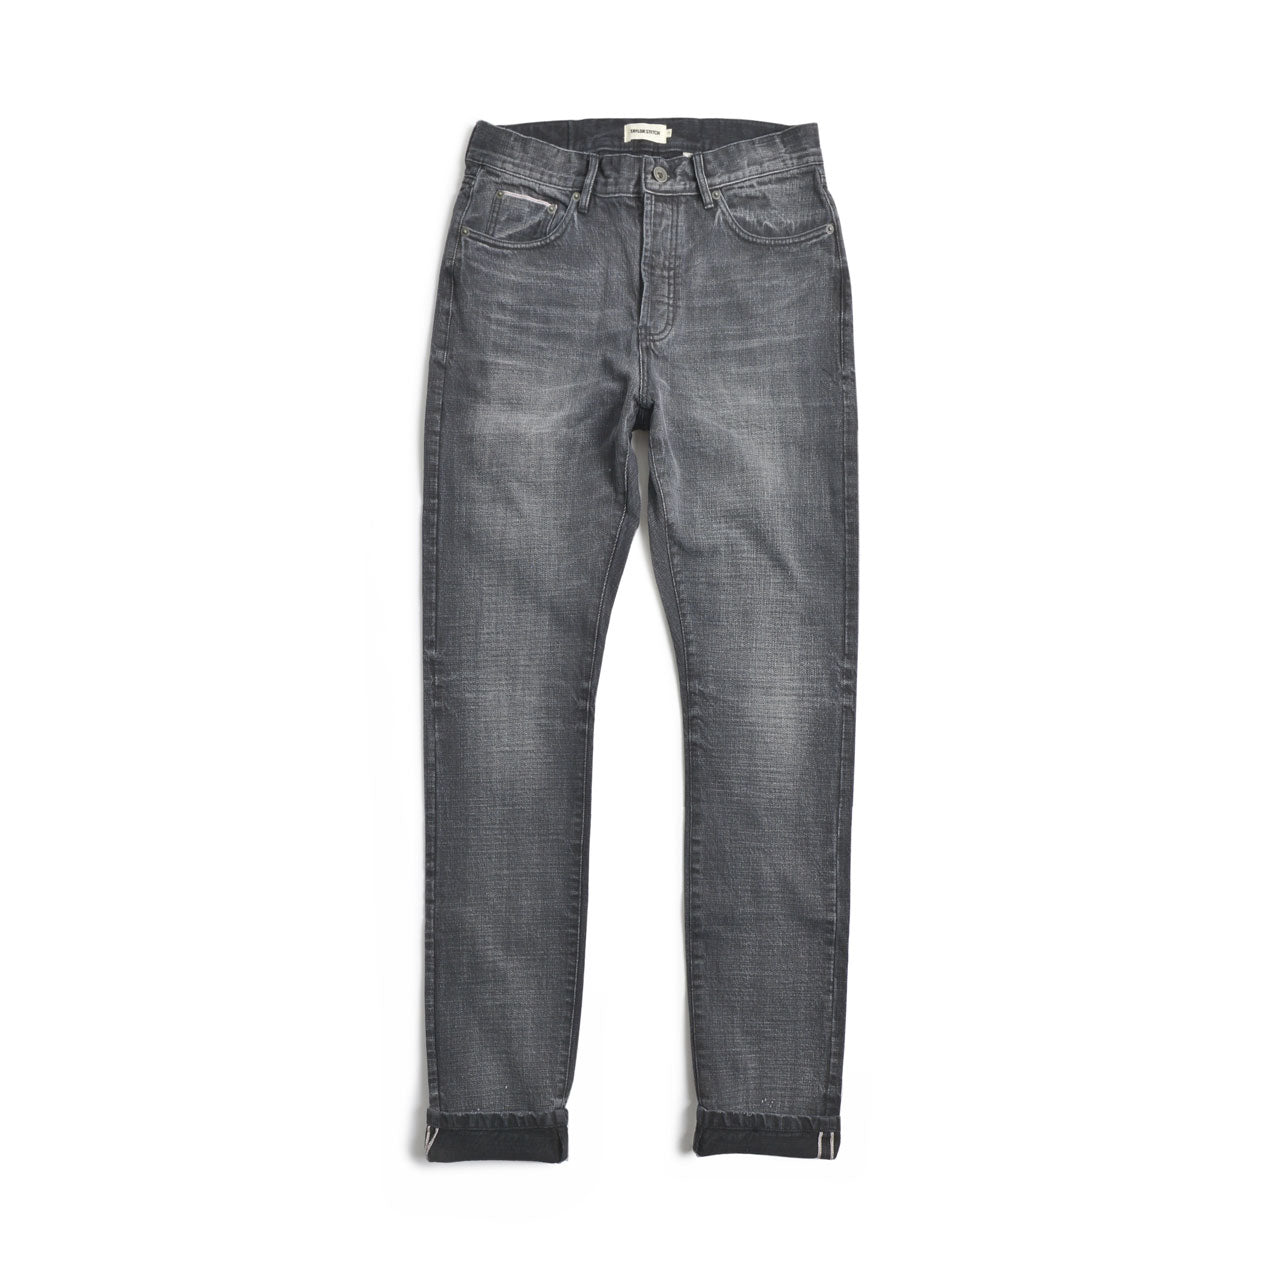 Taylor Stitch 3-Month Wash Selvage Jeans